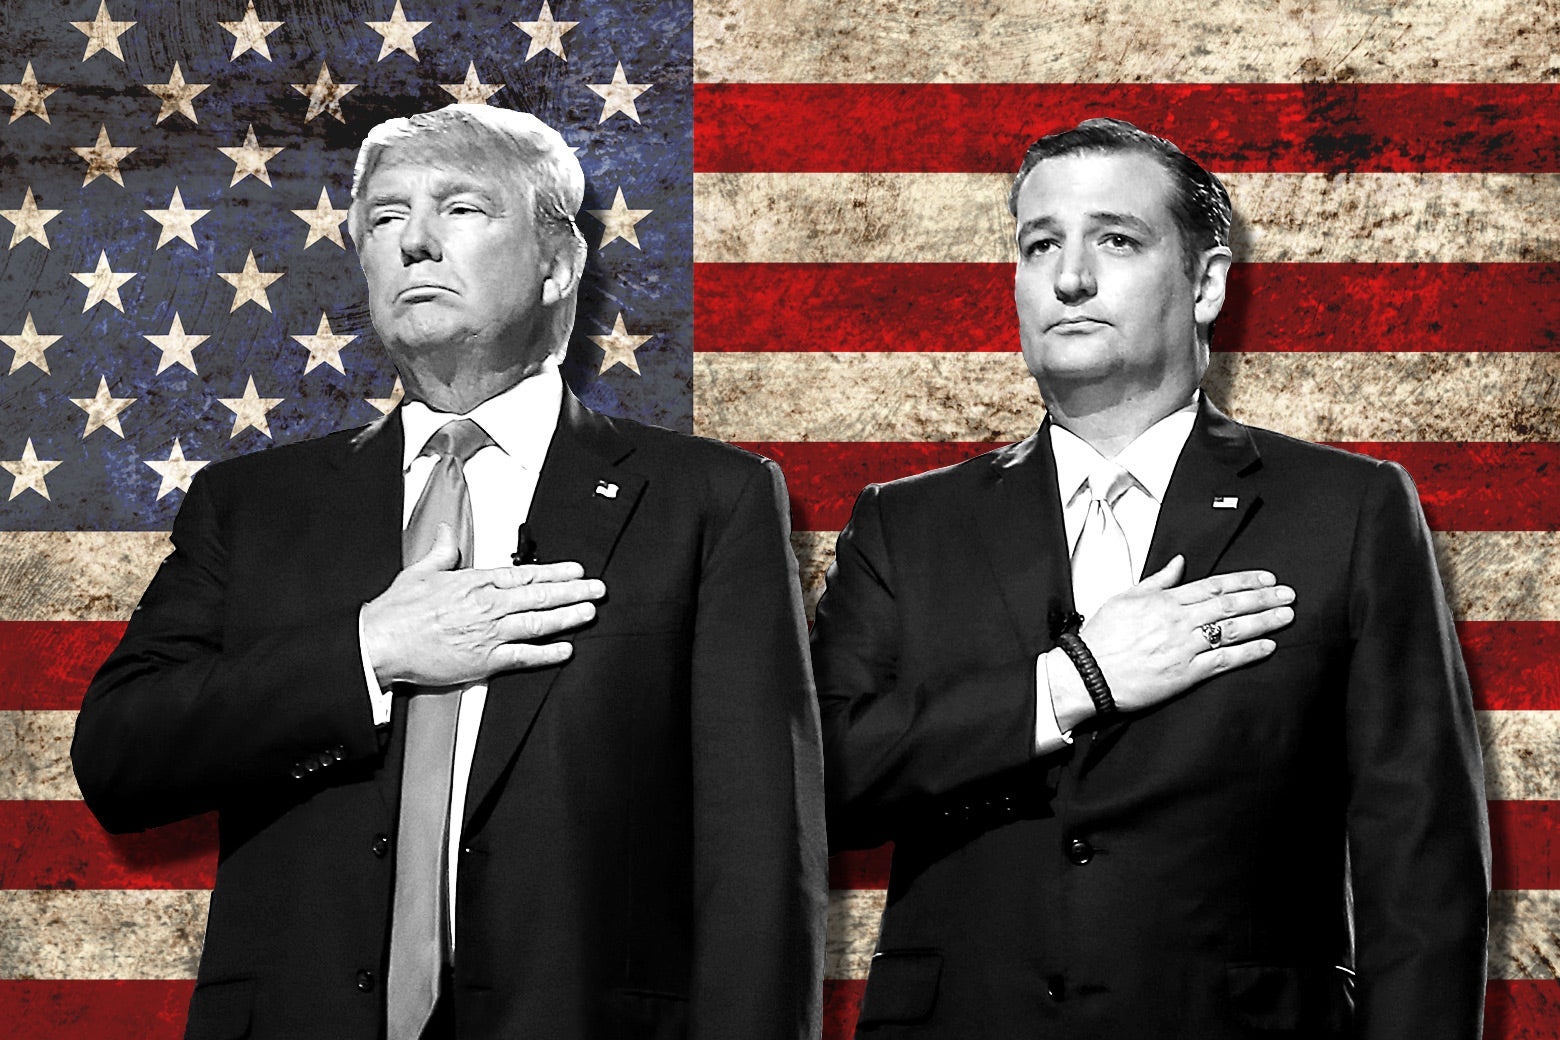 Collage of Trump and Cruz, each standing with his right hand over his heart, in front of an American flag